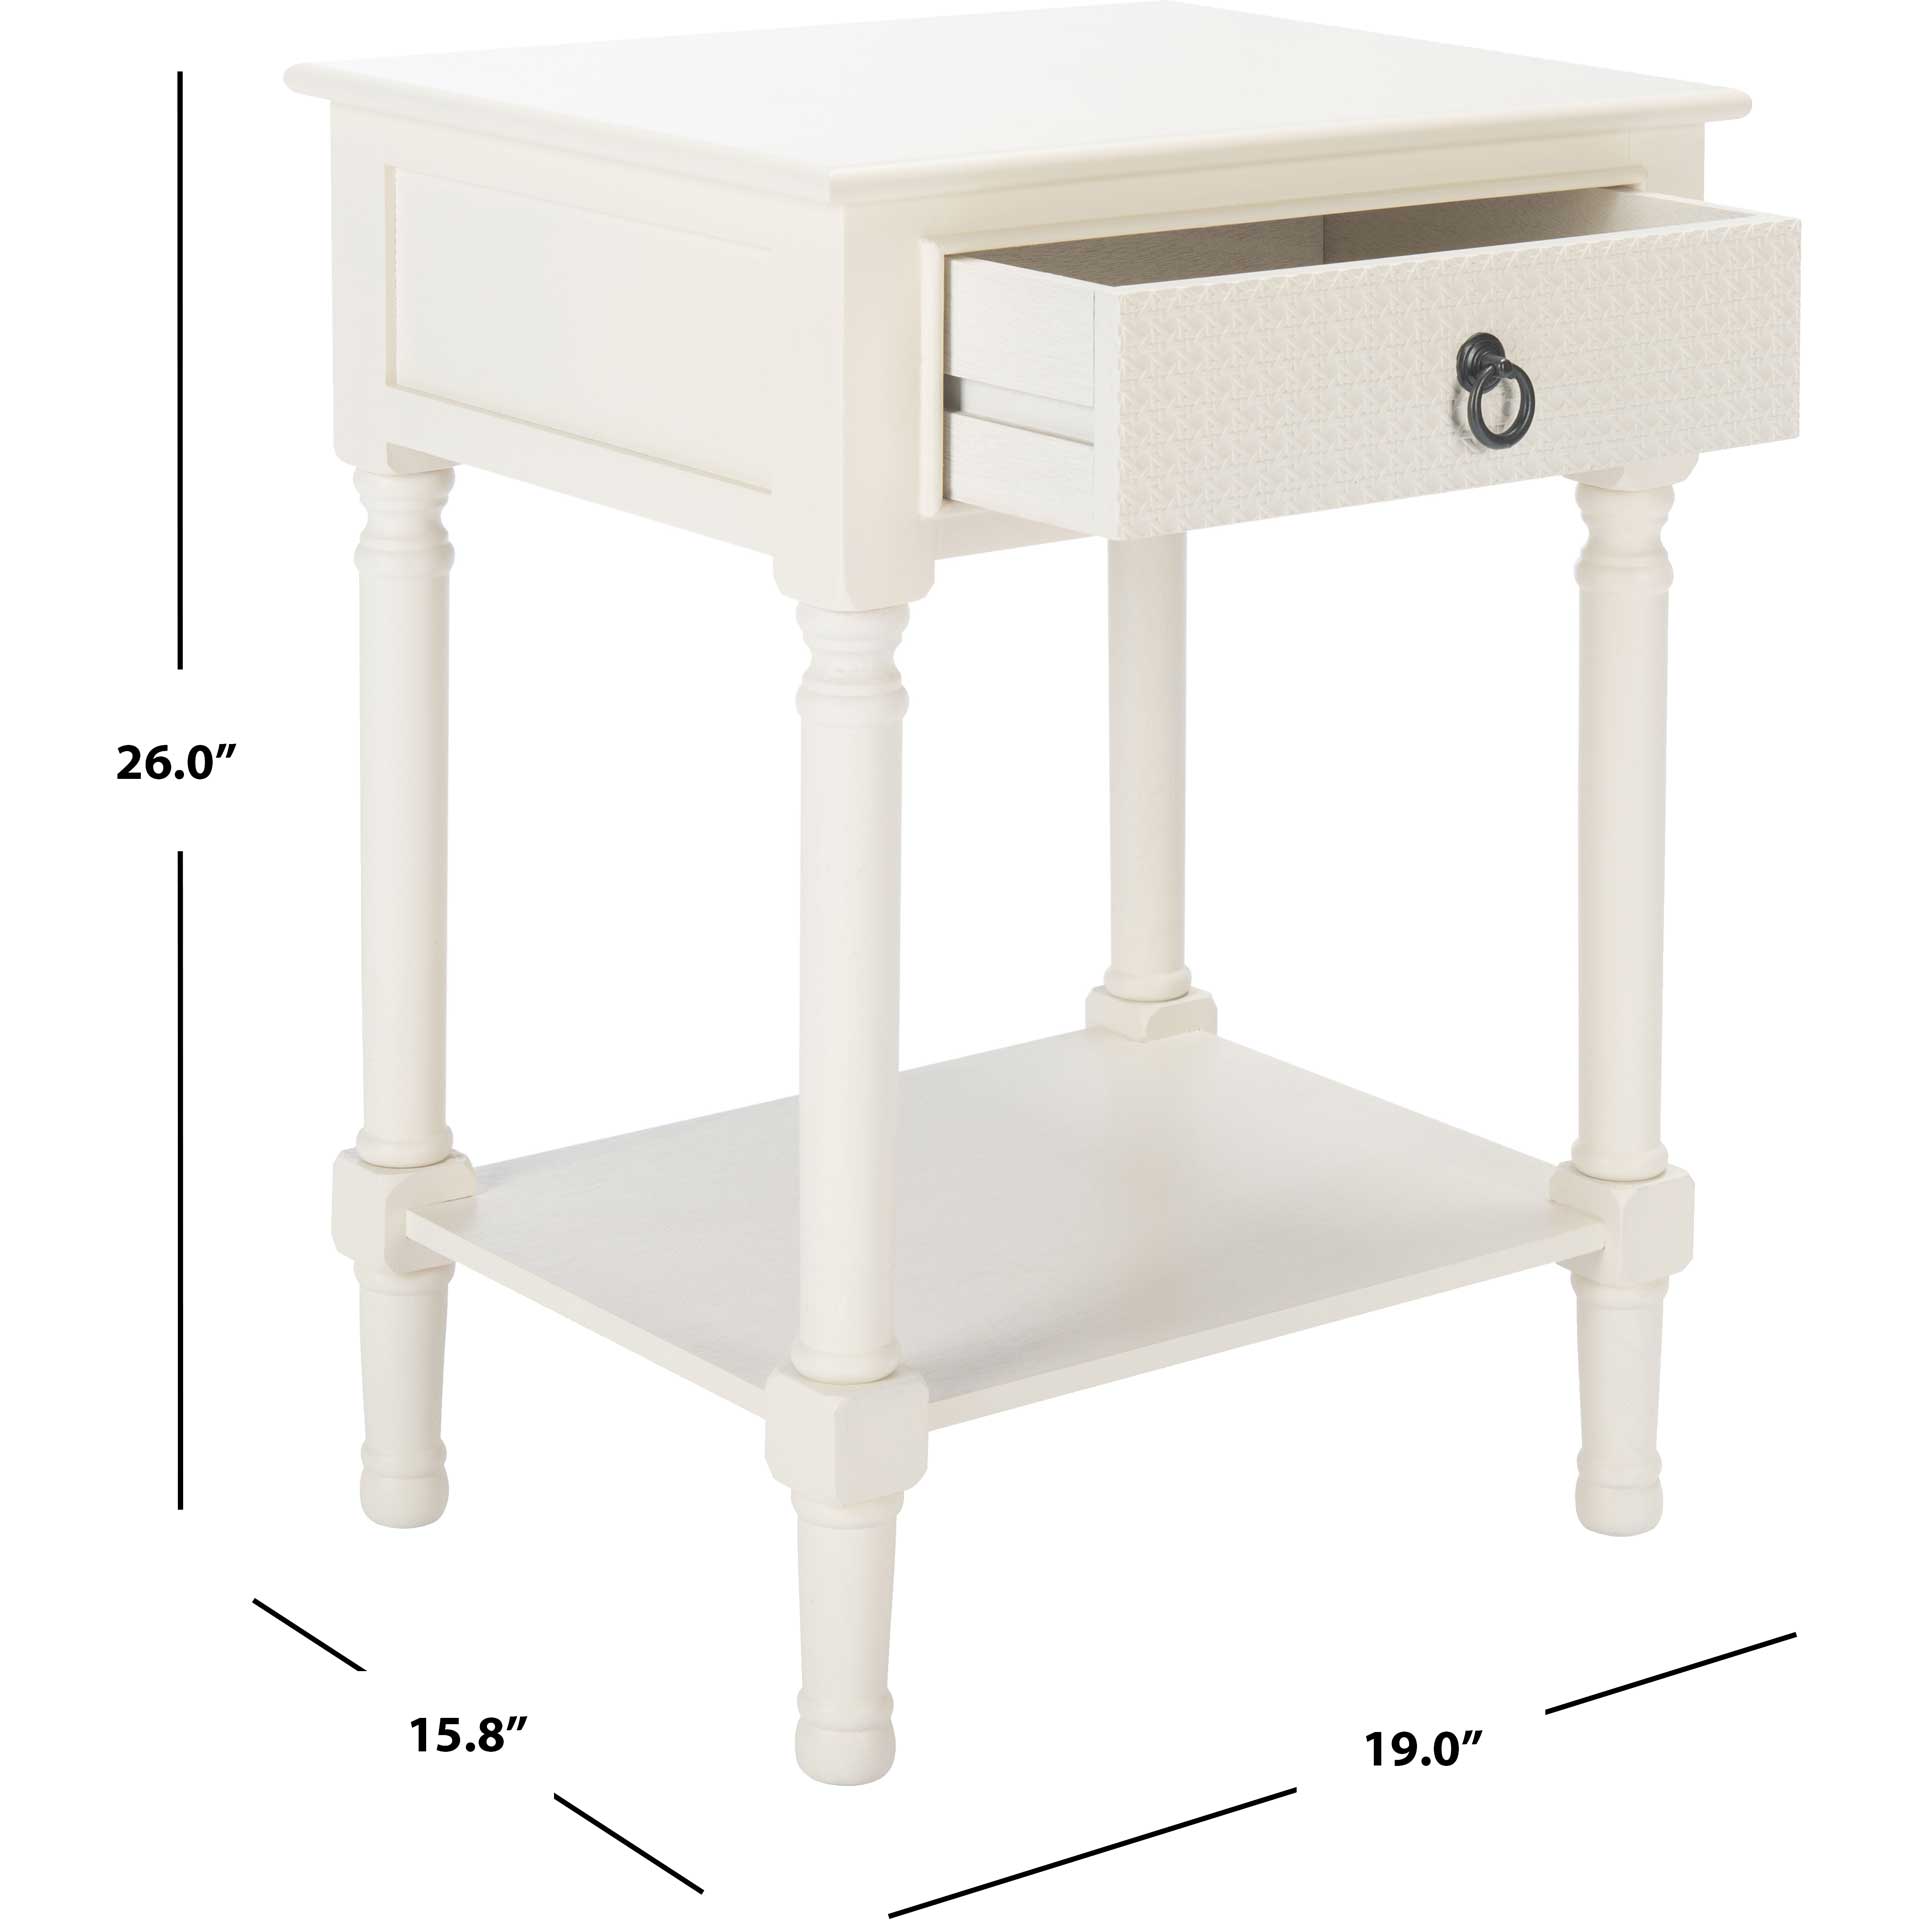 Hale 1 Drawer Accent Table White